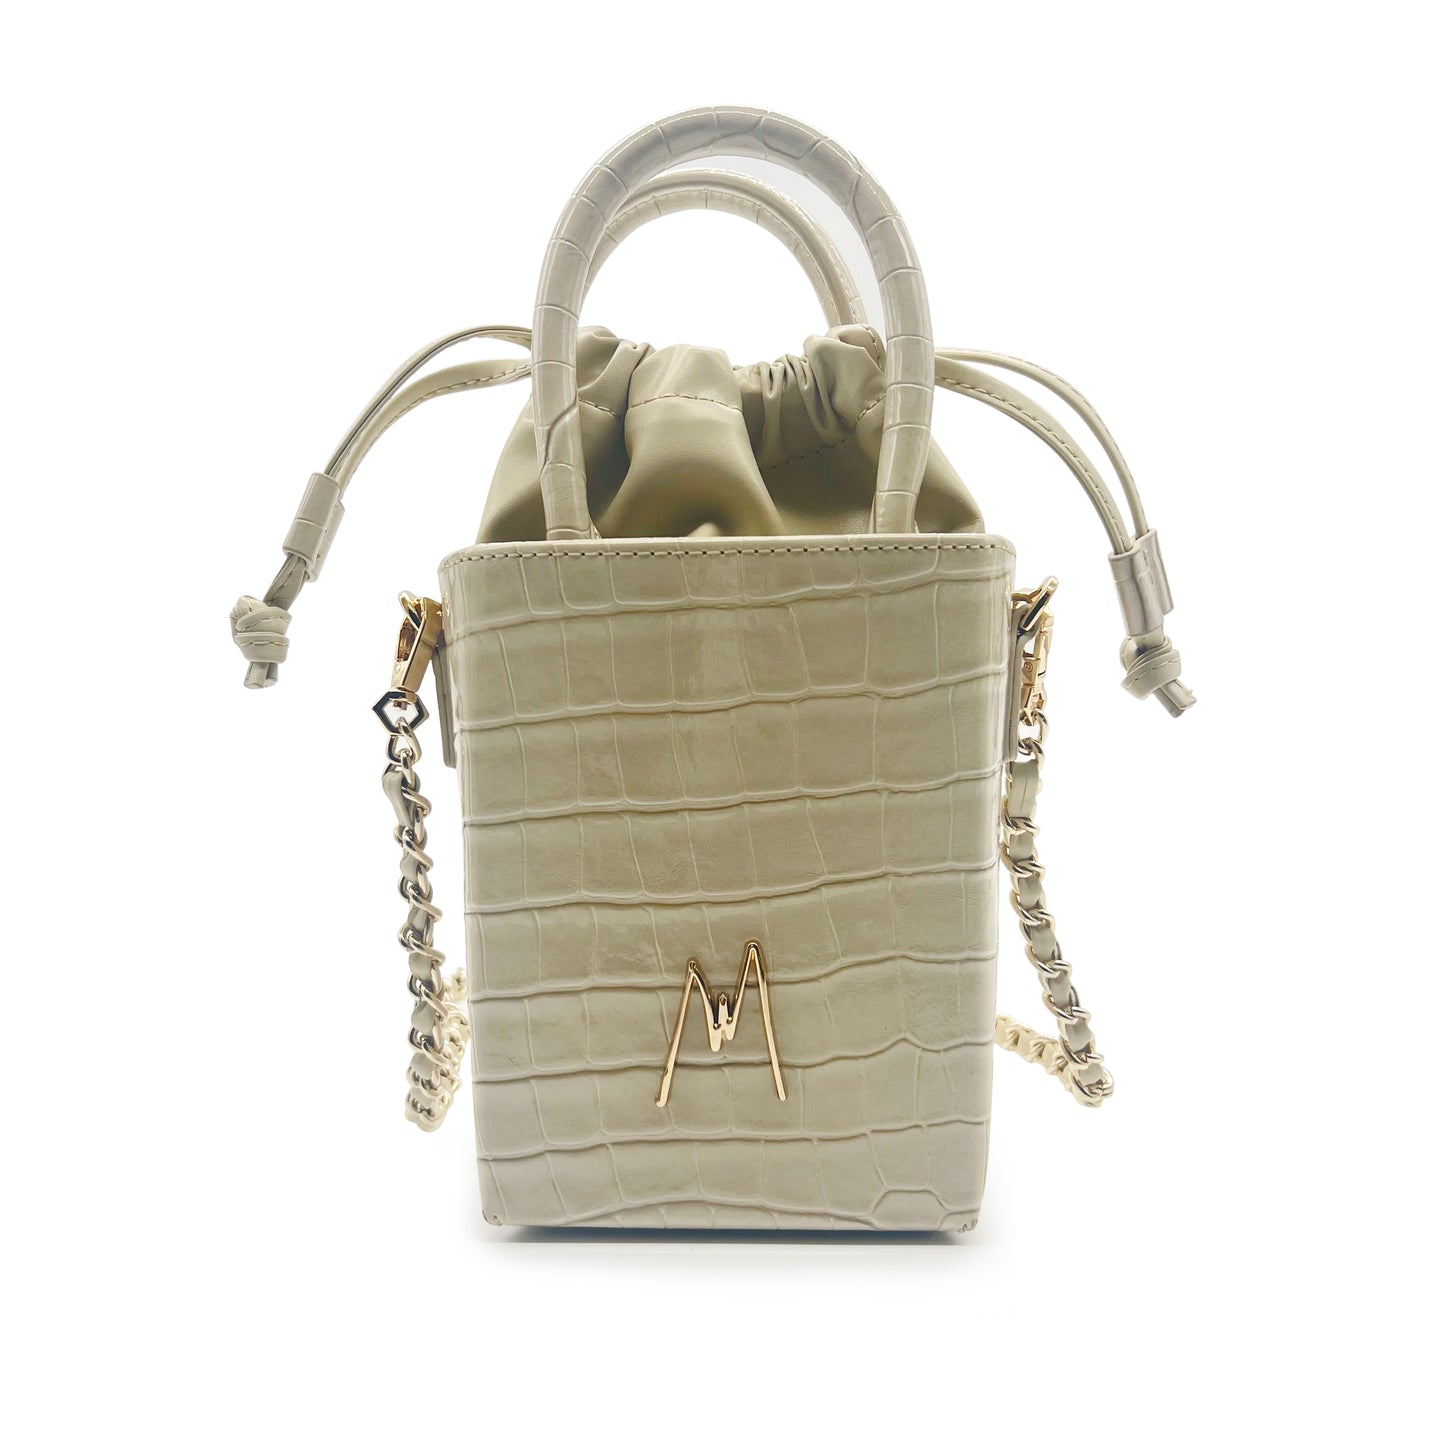 "SMALL LEATHER TOTE"  CROCODILE EMBOSSED - STONE